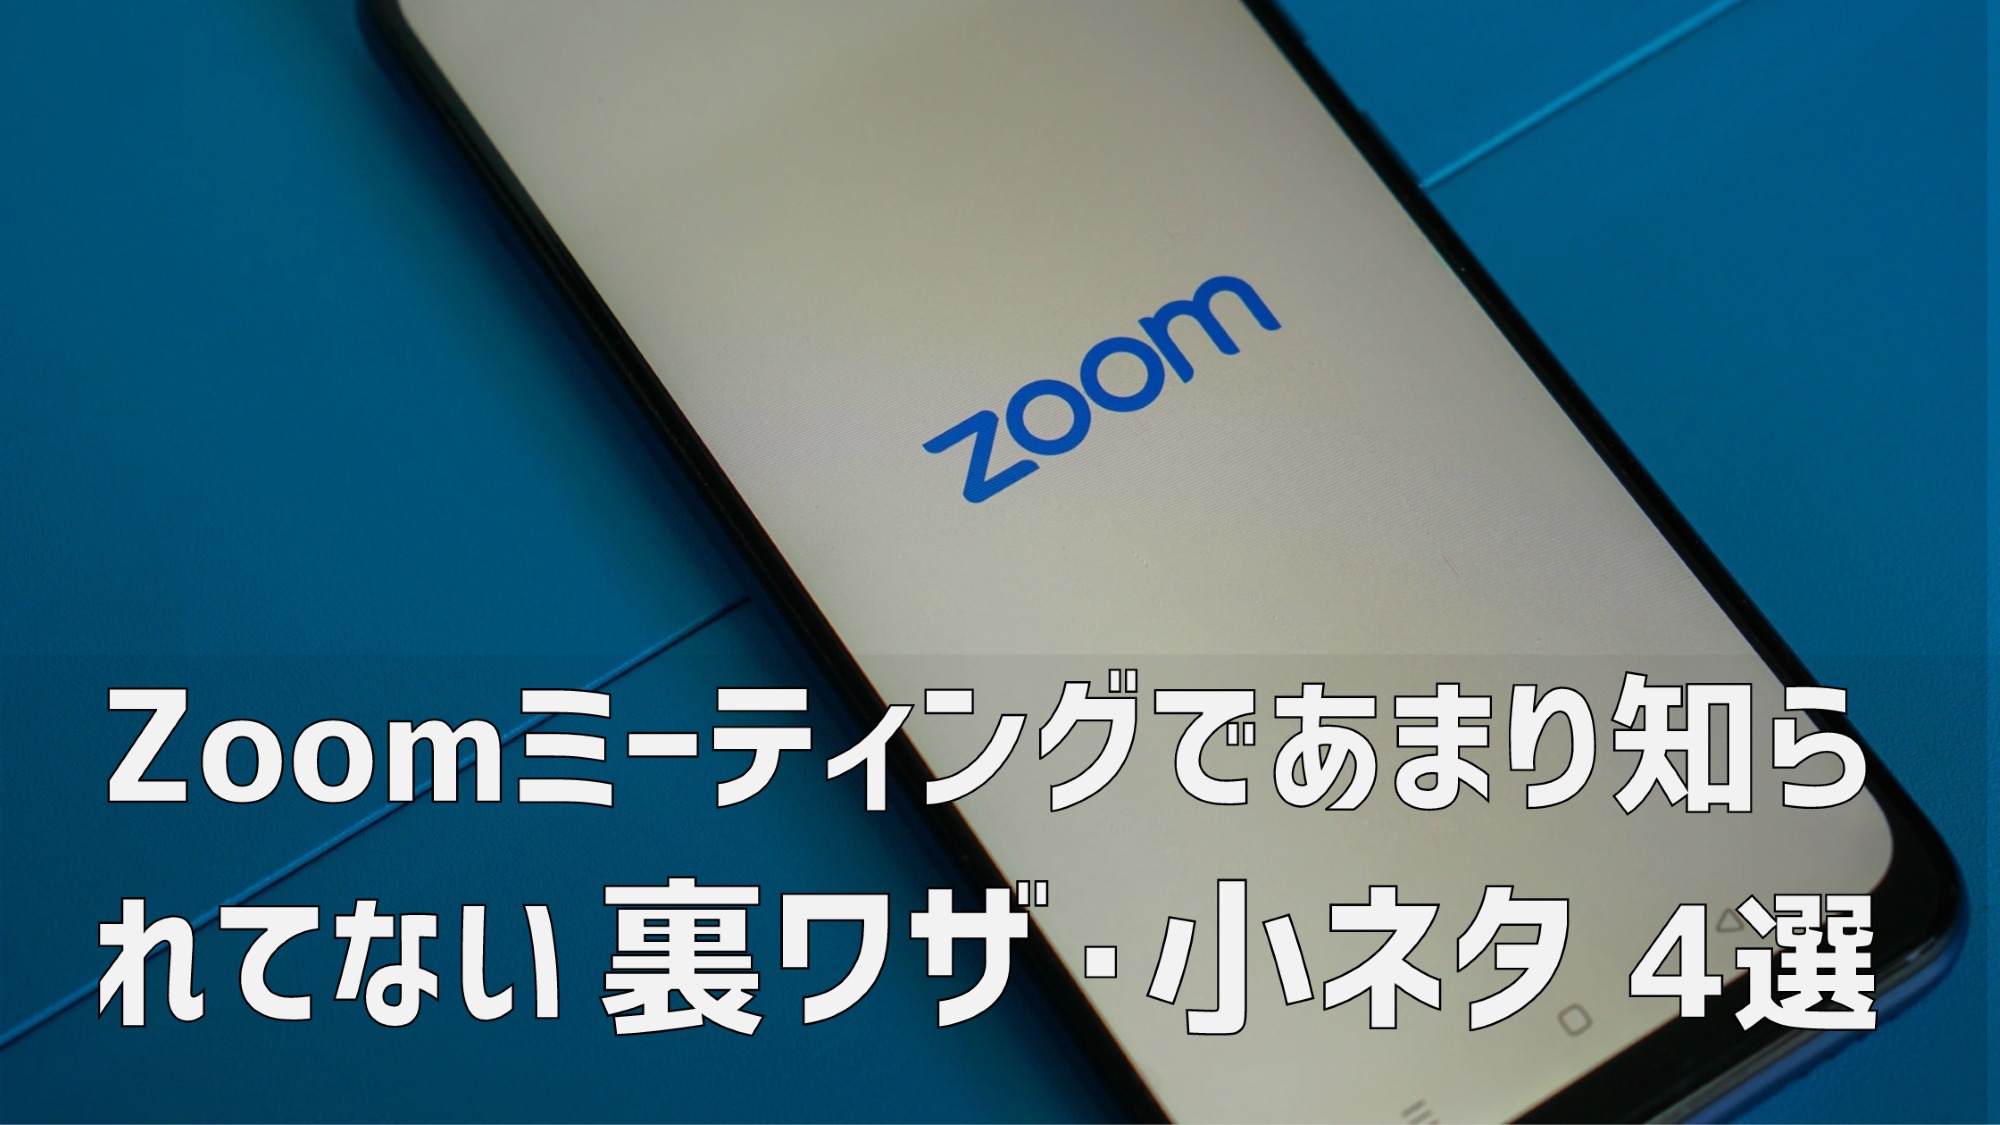 Zoom,裏ワザ